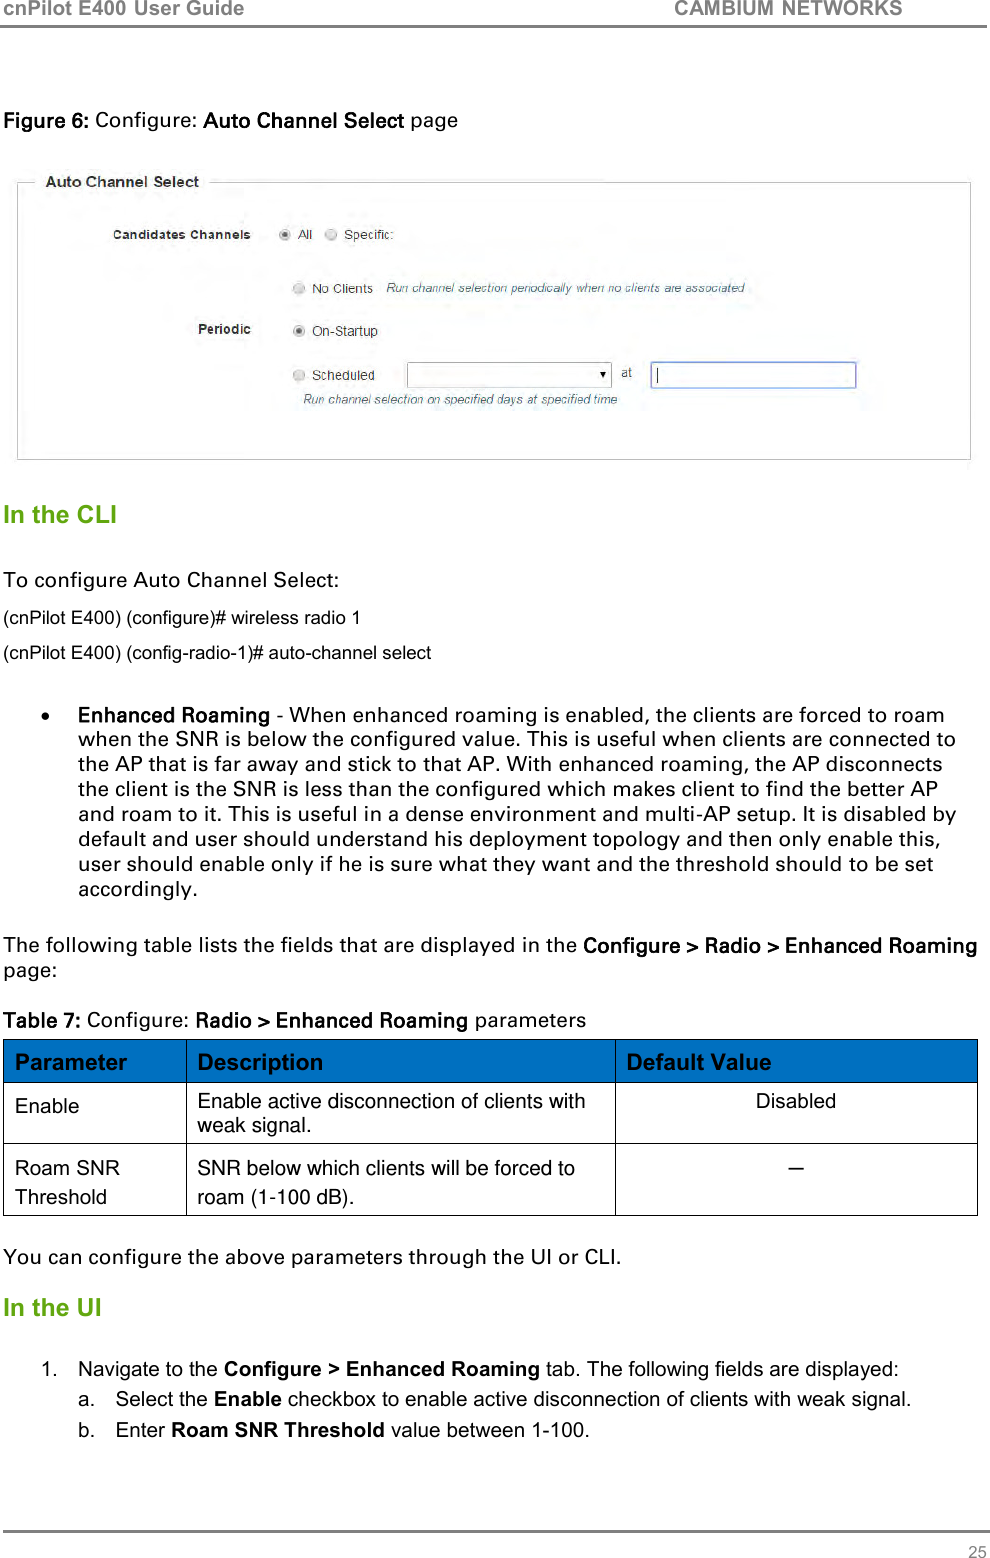 cnPilot E400 User Guide           CAMBIUM NETWORKS   25  Figure 6: Configure: Auto Channel Select page    In the CLI  To configure Auto Channel Select: (cnPilot E400) (configure)# wireless radio 1 (cnPilot E400) (config-radio-1)# auto-channel select   Enhanced Roaming - When enhanced roaming is enabled, the clients are forced to roam when the SNR is below the configured value. This is useful when clients are connected to the AP that is far away and stick to that AP. With enhanced roaming, the AP disconnects the client is the SNR is less than the configured which makes client to find the better AP and roam to it. This is useful in a dense environment and multi-AP setup. It is disabled by default and user should understand his deployment topology and then only enable this, user should enable only if he is sure what they want and the threshold should to be set accordingly.  The following table lists the fields that are displayed in the Configure &gt; Radio &gt; Enhanced Roaming page:  Table 7: Configure: Radio &gt; Enhanced Roaming parameters Parameter Description Default Value Enable Enable active disconnection of clients with weak signal. Disabled Roam SNR Threshold SNR below which clients will be forced to roam (1-100 dB). ─  You can configure the above parameters through the UI or CLI.  In the UI  1.  Navigate to the Configure &gt; Enhanced Roaming tab. The following fields are displayed: a.  Select the Enable checkbox to enable active disconnection of clients with weak signal.  b.  Enter Roam SNR Threshold value between 1-100. 